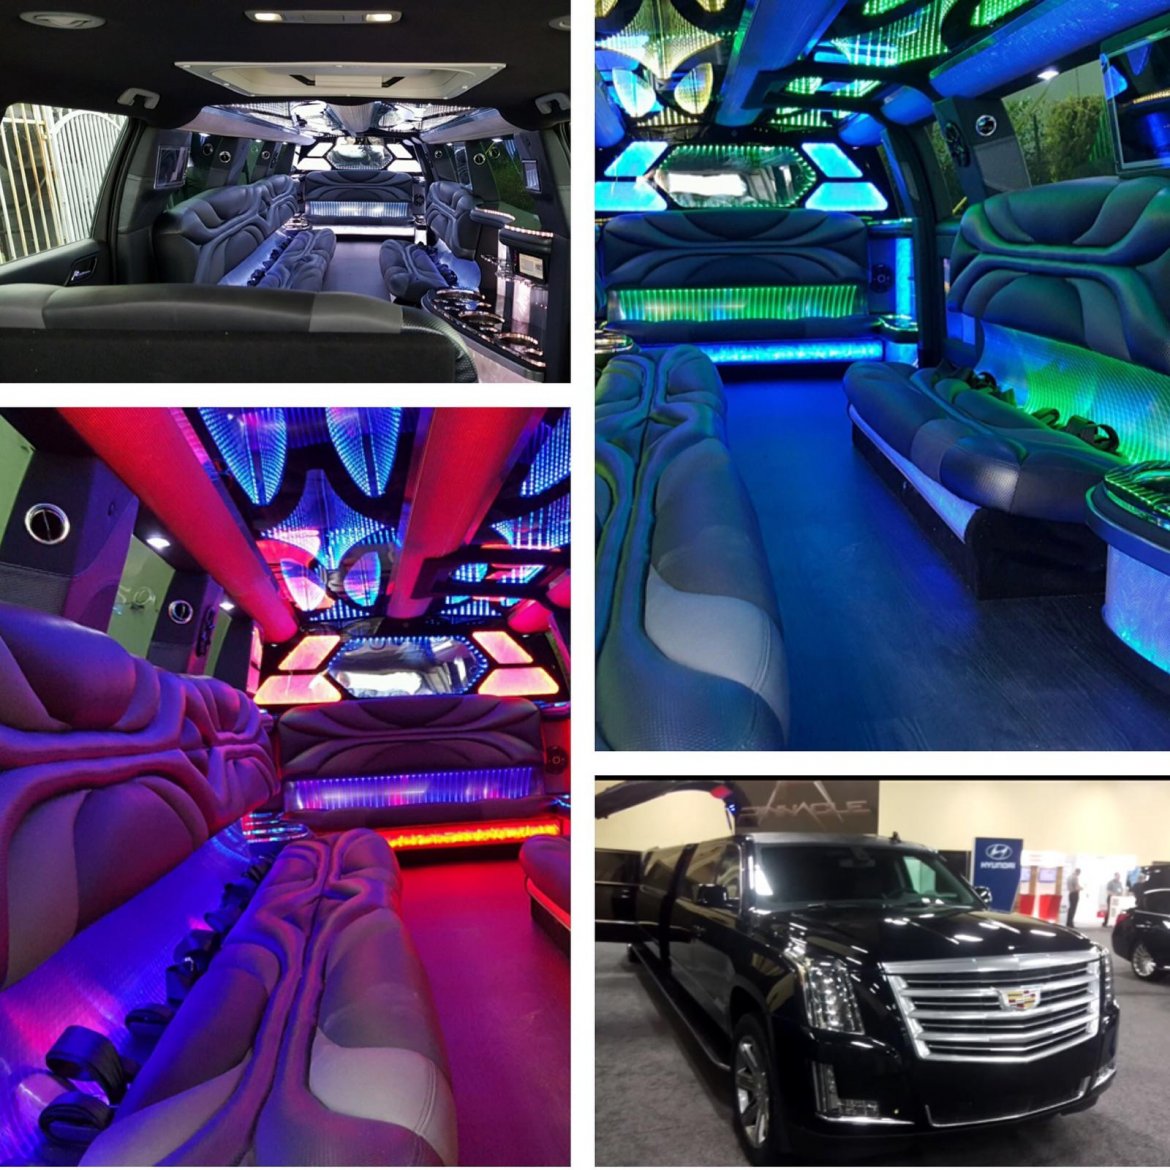 SUV Stretch for sale: 2015 Cadillac Escalade 200&quot; by Pinnacle